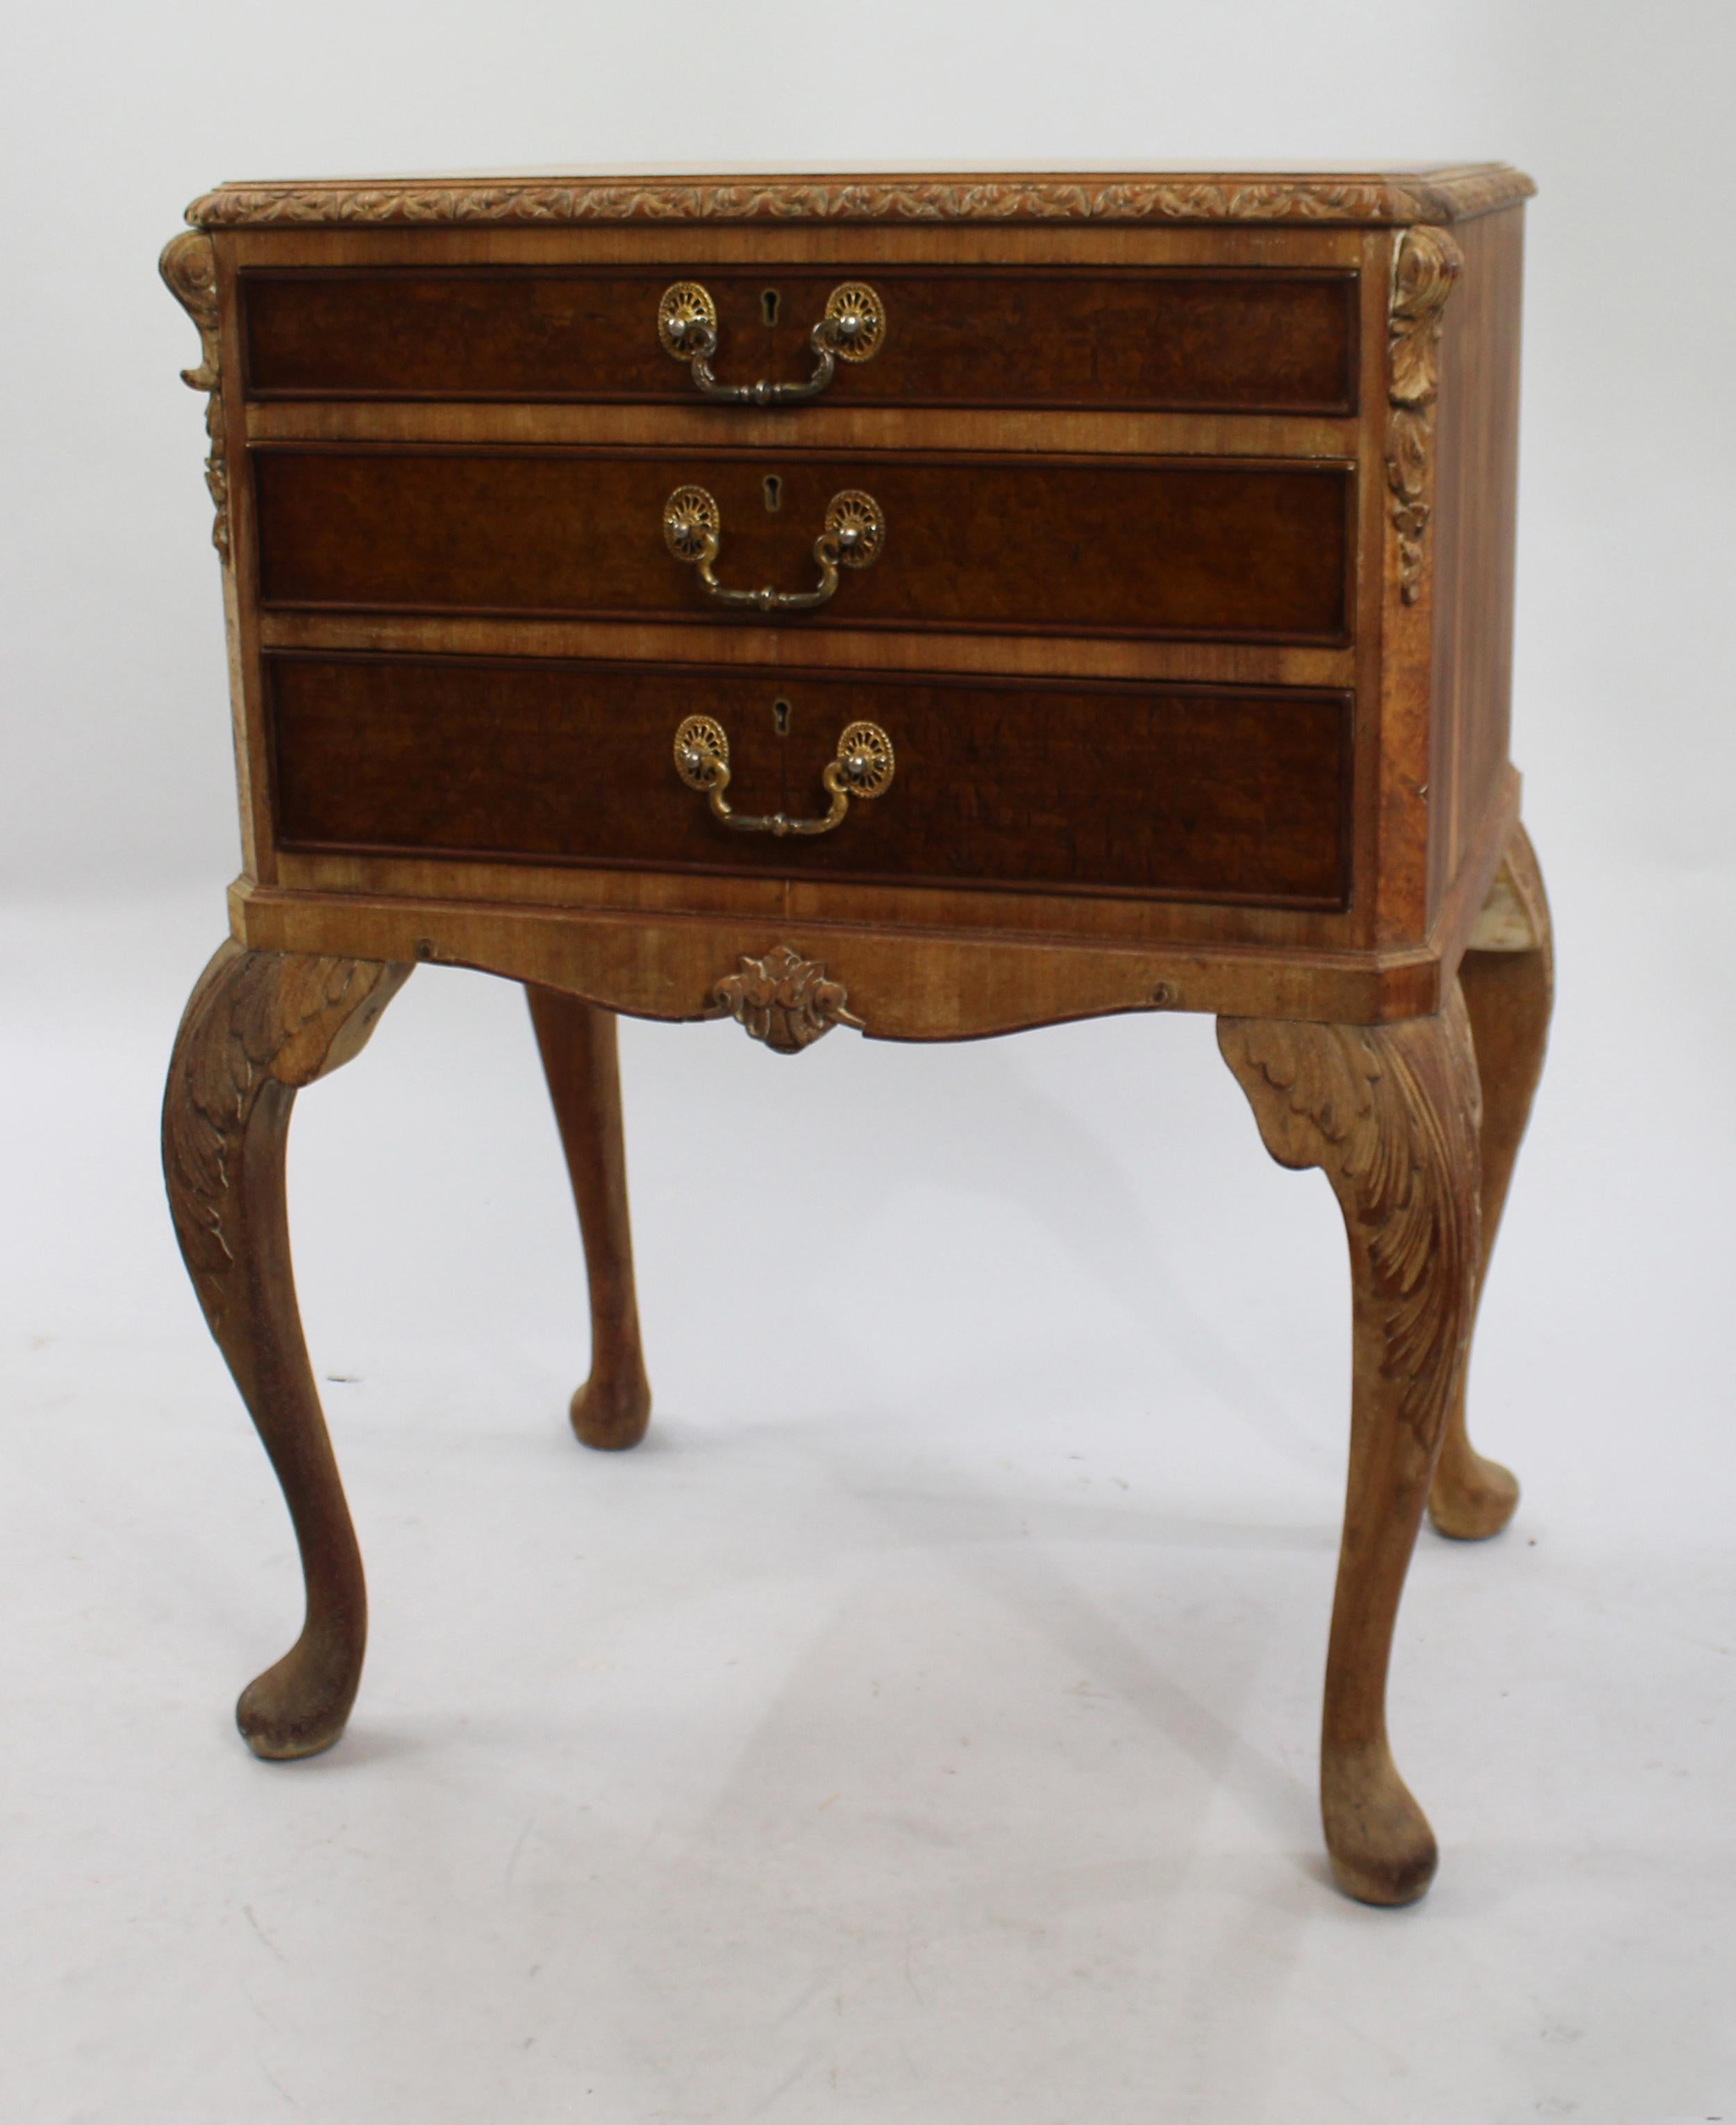 European Early 20th C. Carved Walnut Footed Cutlery Chest For Sale